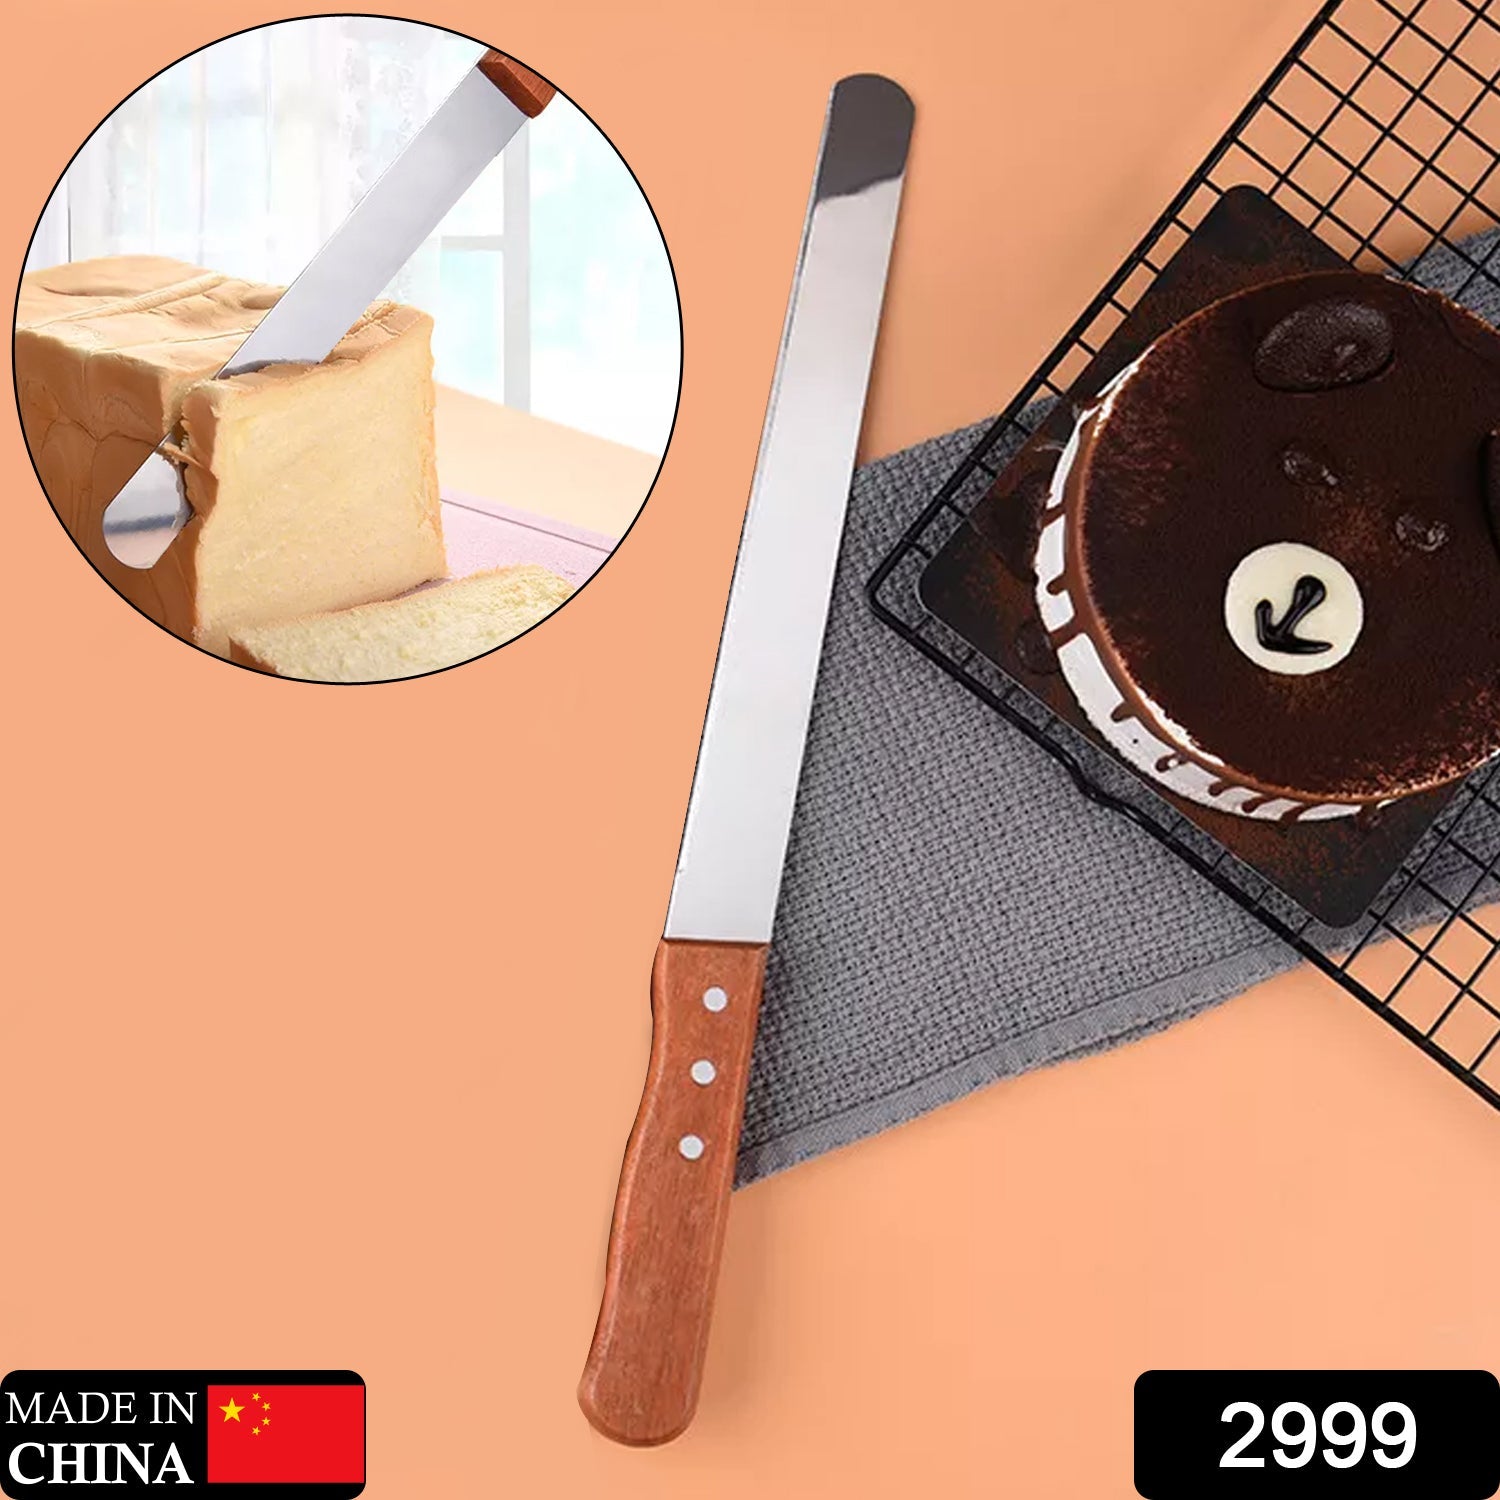 2999 1 pc 17 inch Stainless Steel Bread Knife Toast Slicing Knives Cake Slicer Baking Pastry Cutter with Wooden Handle. DeoDap